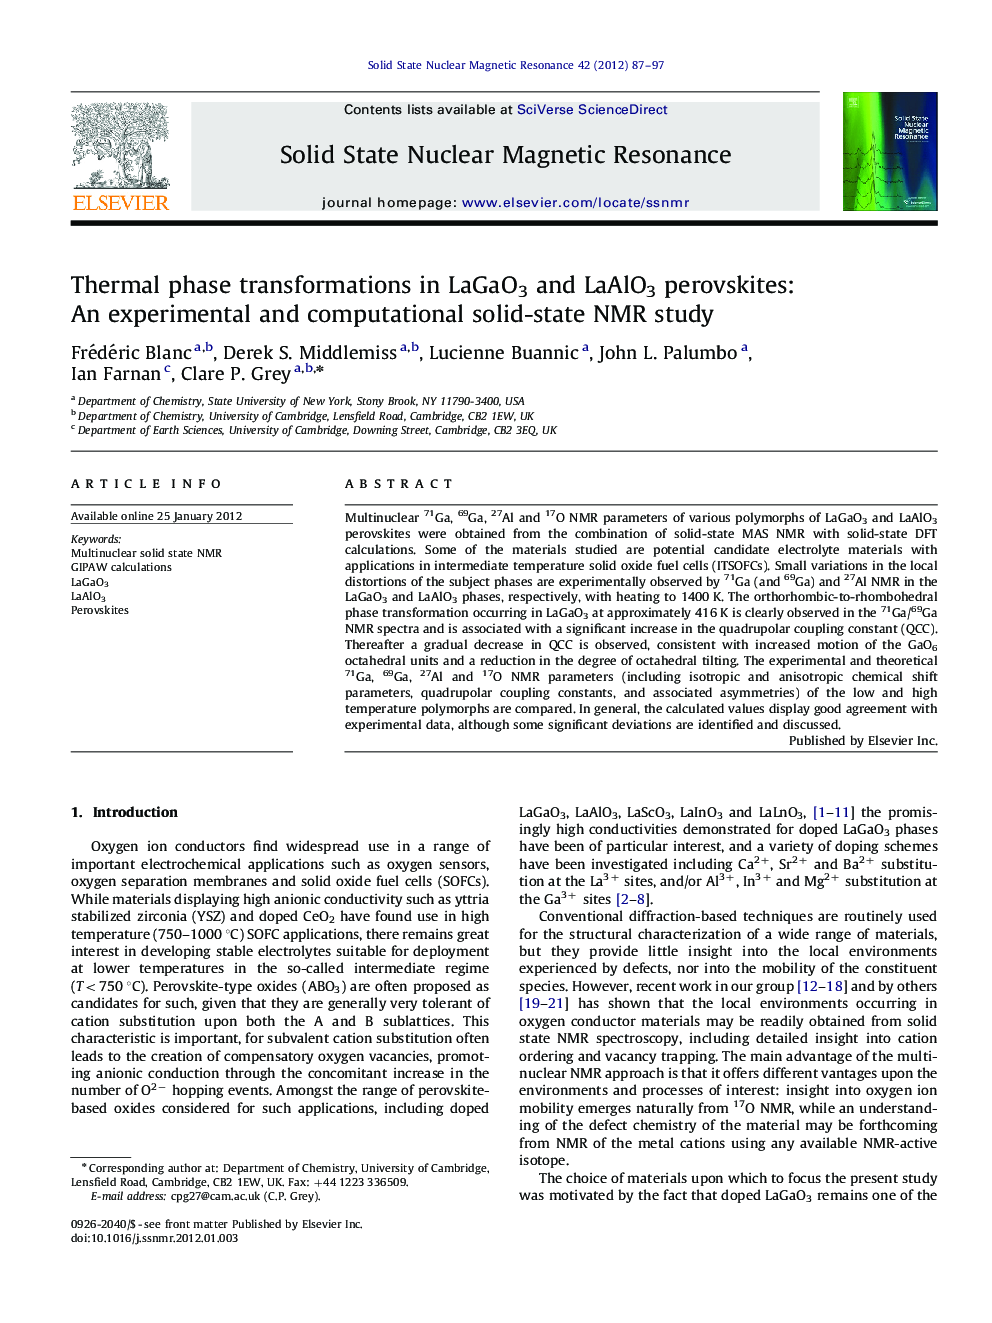 Thermal phase transformations in LaGaO3 and LaAlO3 perovskites: An experimental and computational solid-state NMR study